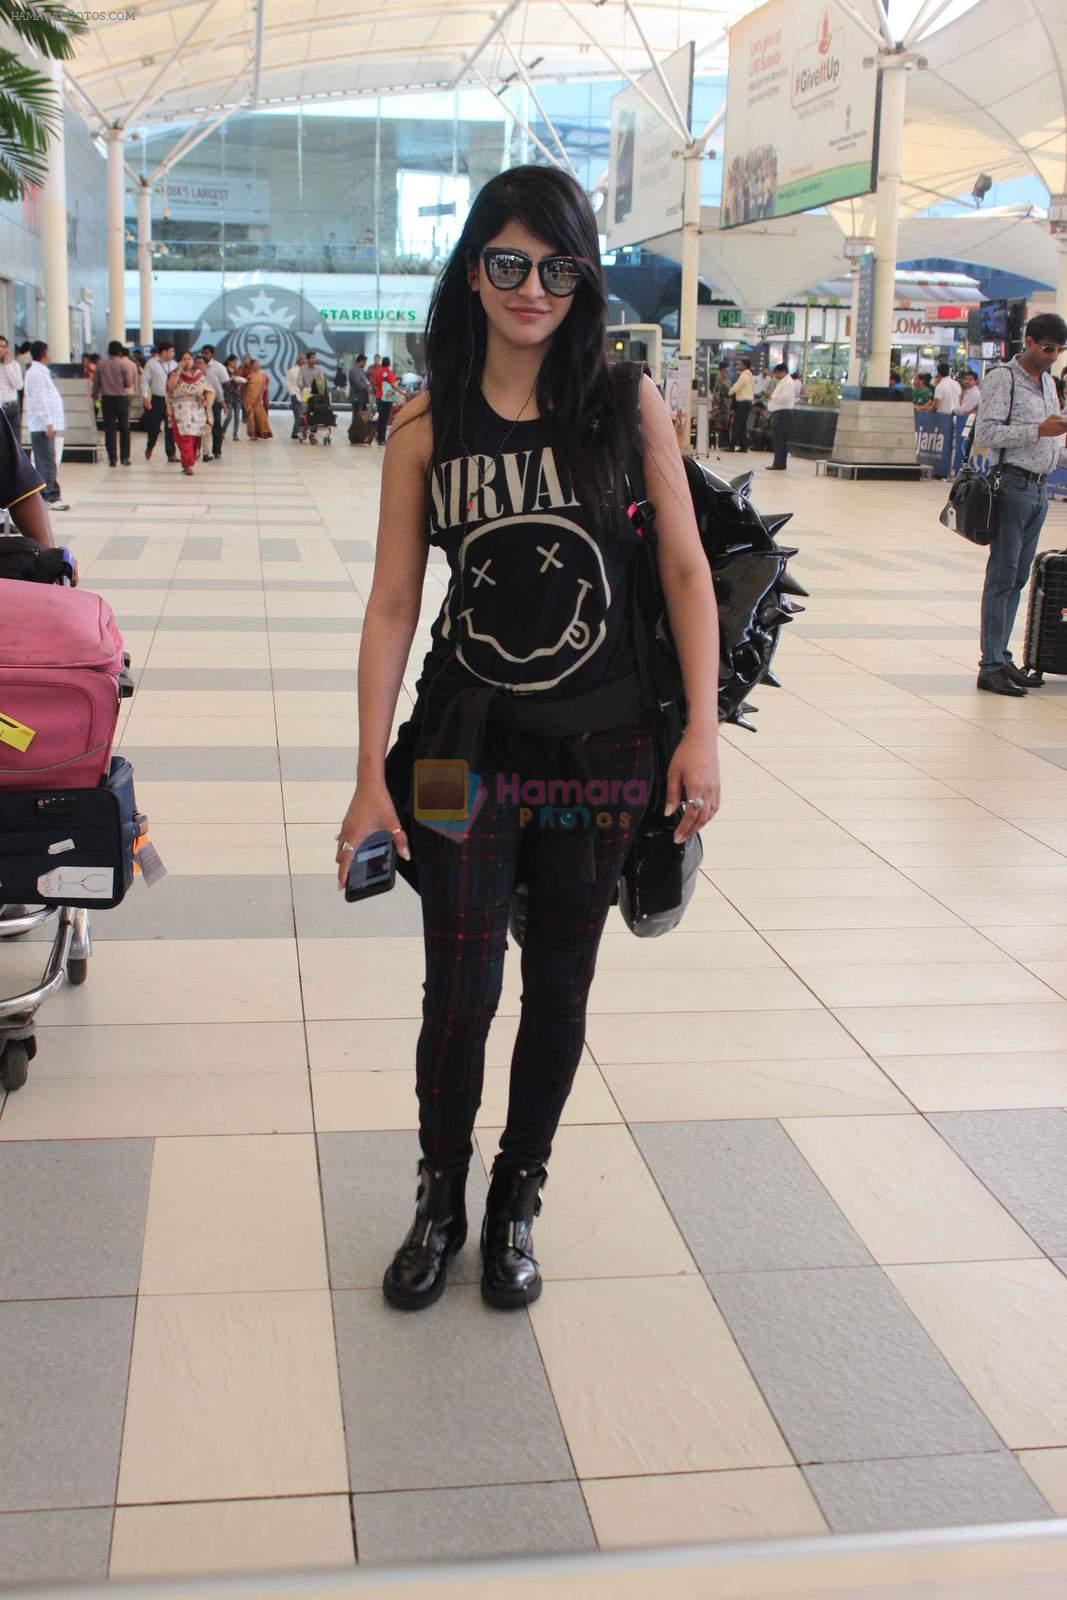 Shruti Haasan snapped at airport on 1st Dec 2015